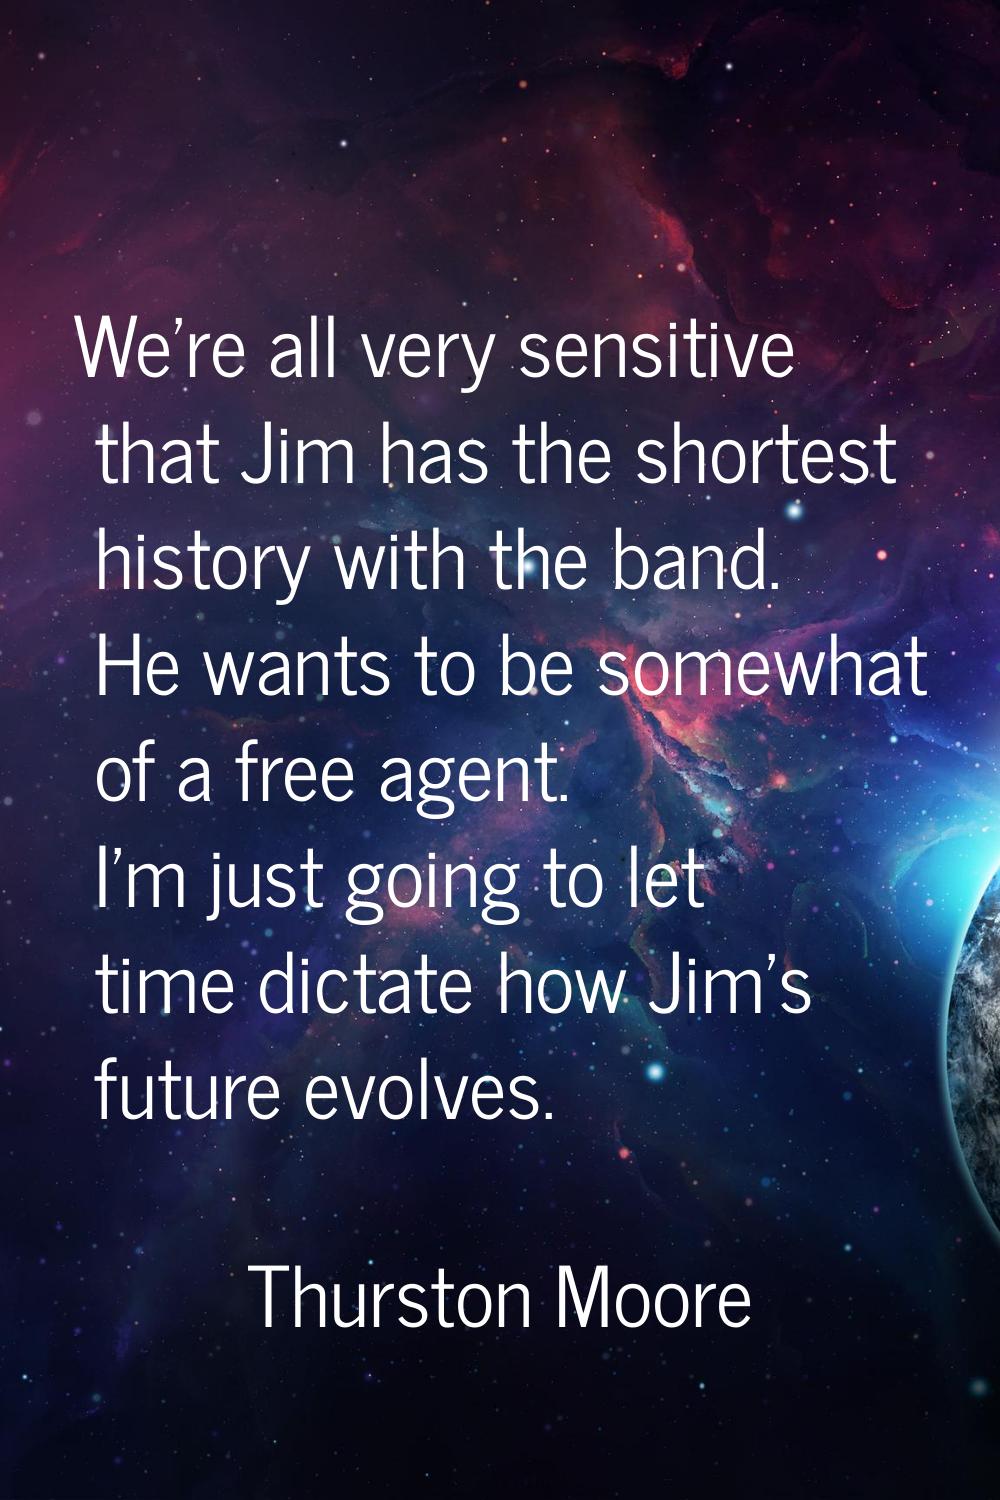 We're all very sensitive that Jim has the shortest history with the band. He wants to be somewhat o